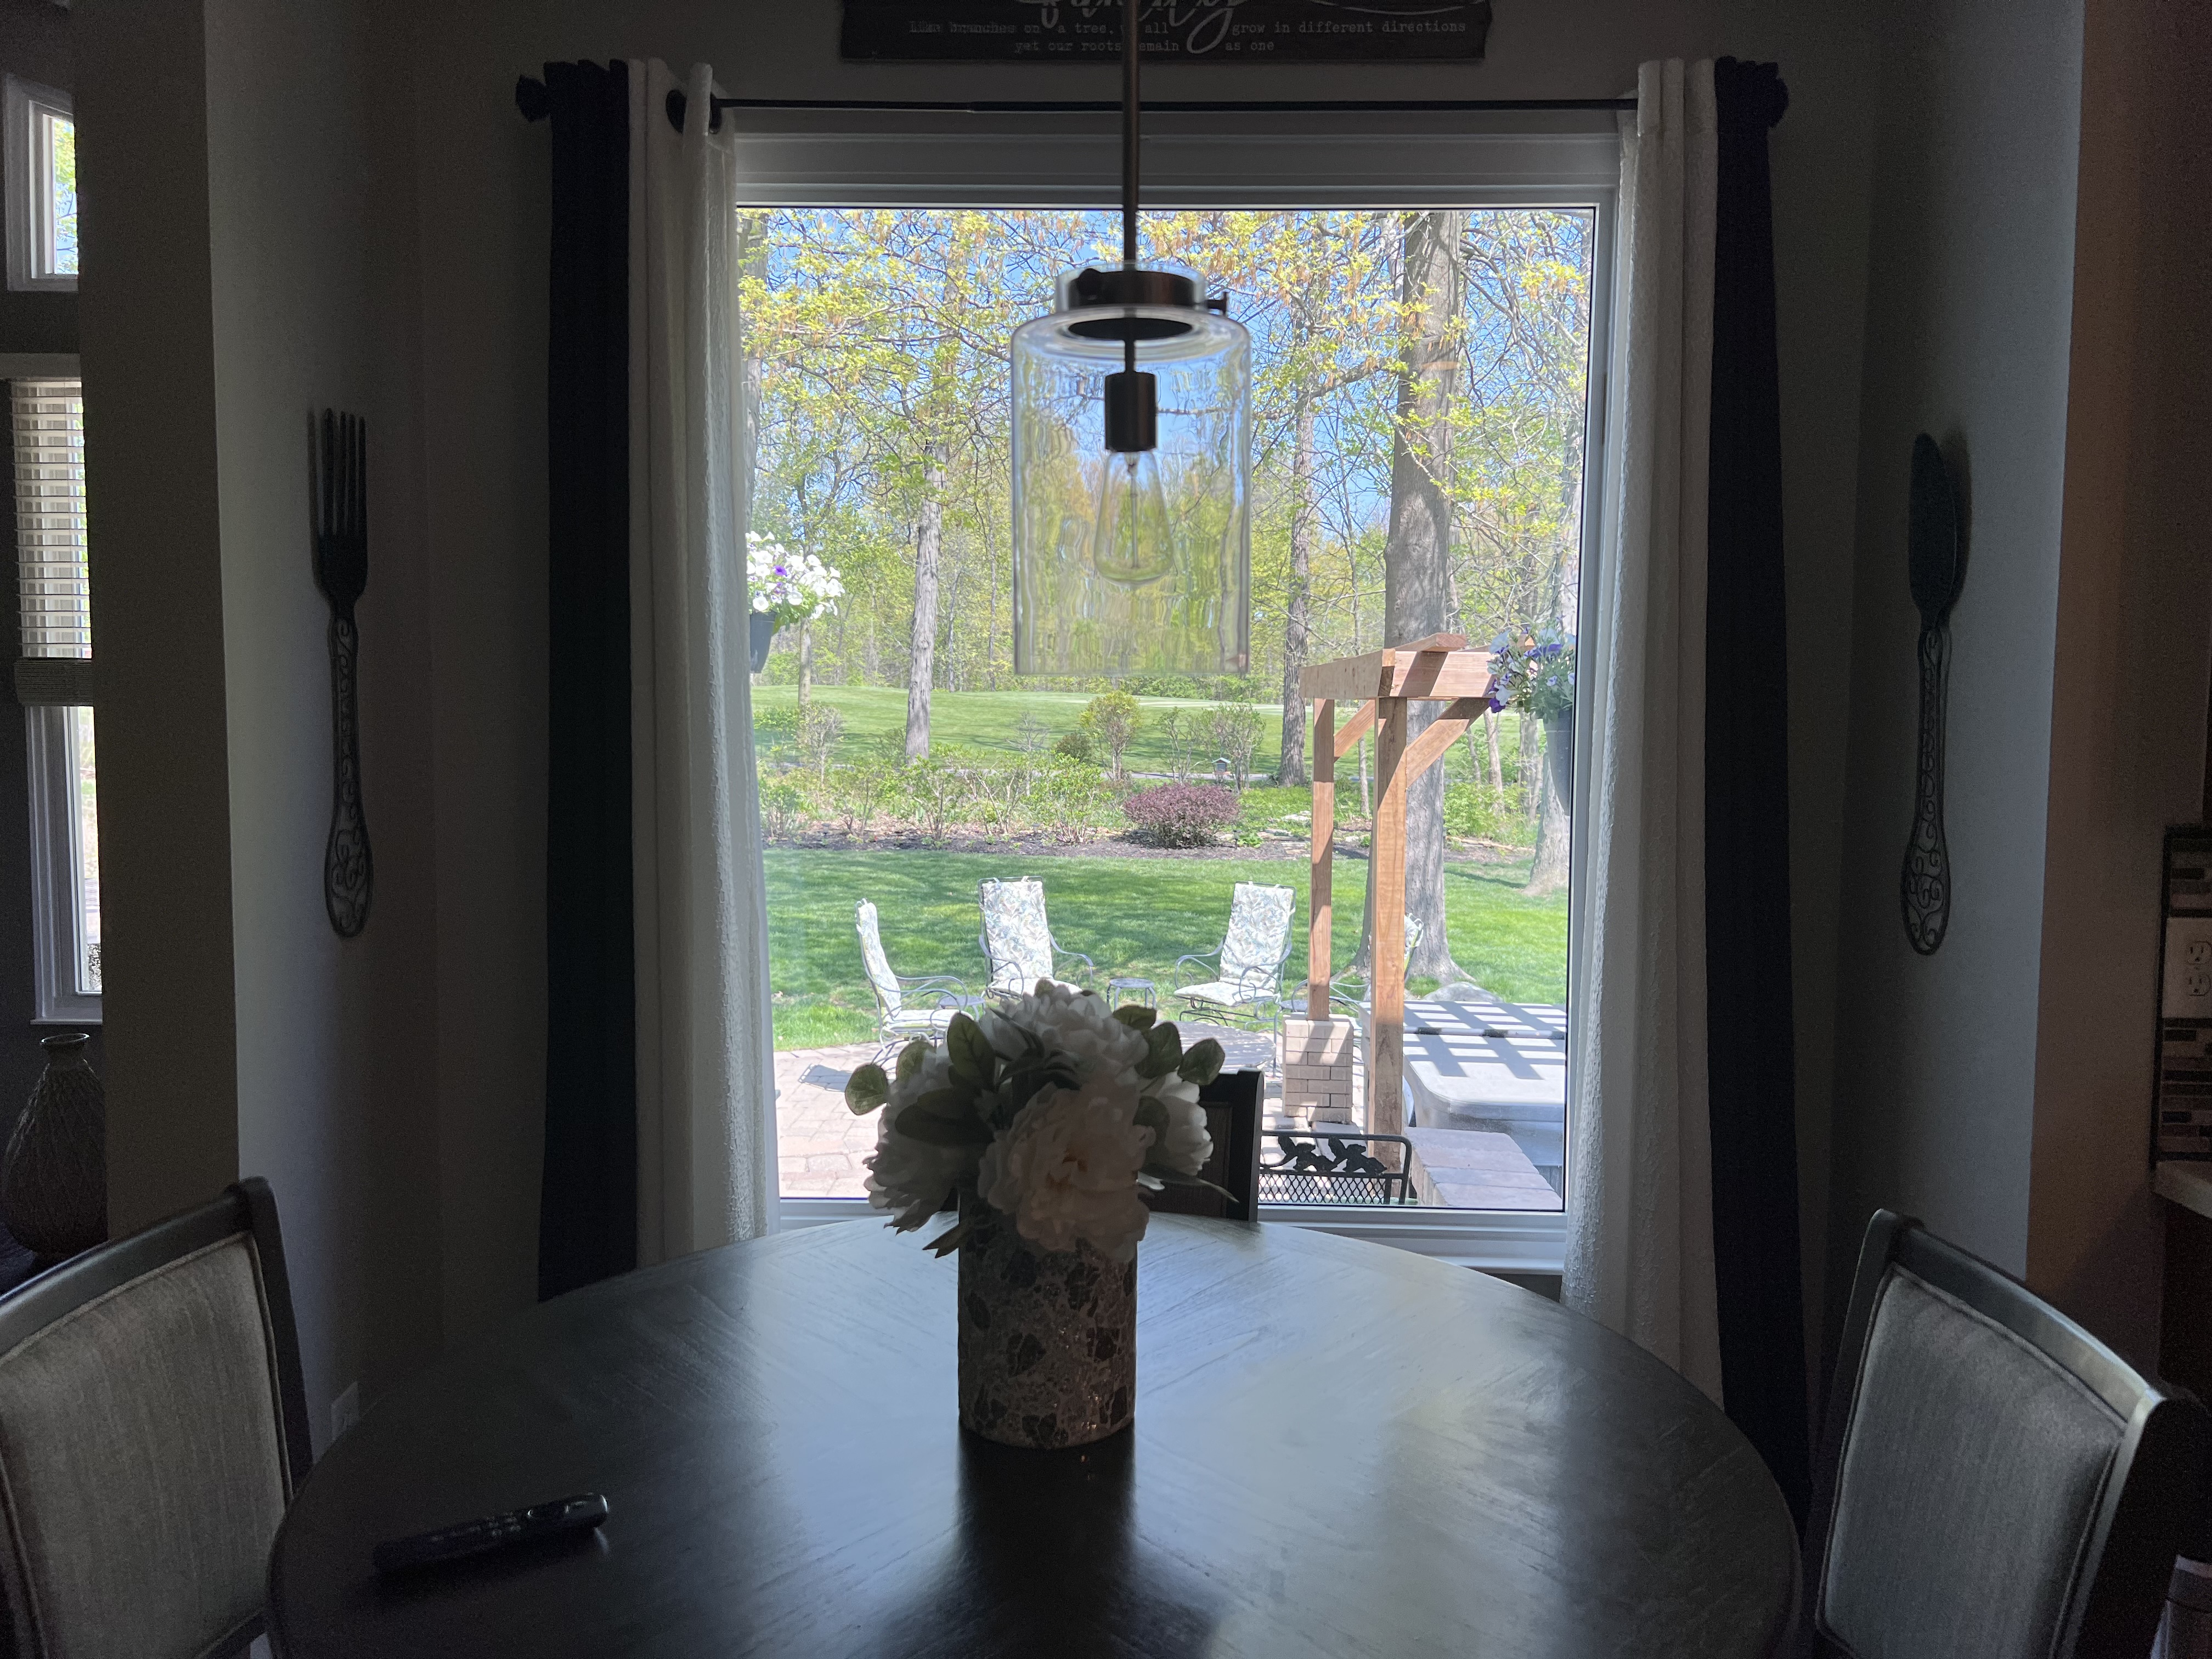 Conversion from twin Single Hung windows to a new beautiful large picture window for their Dinette